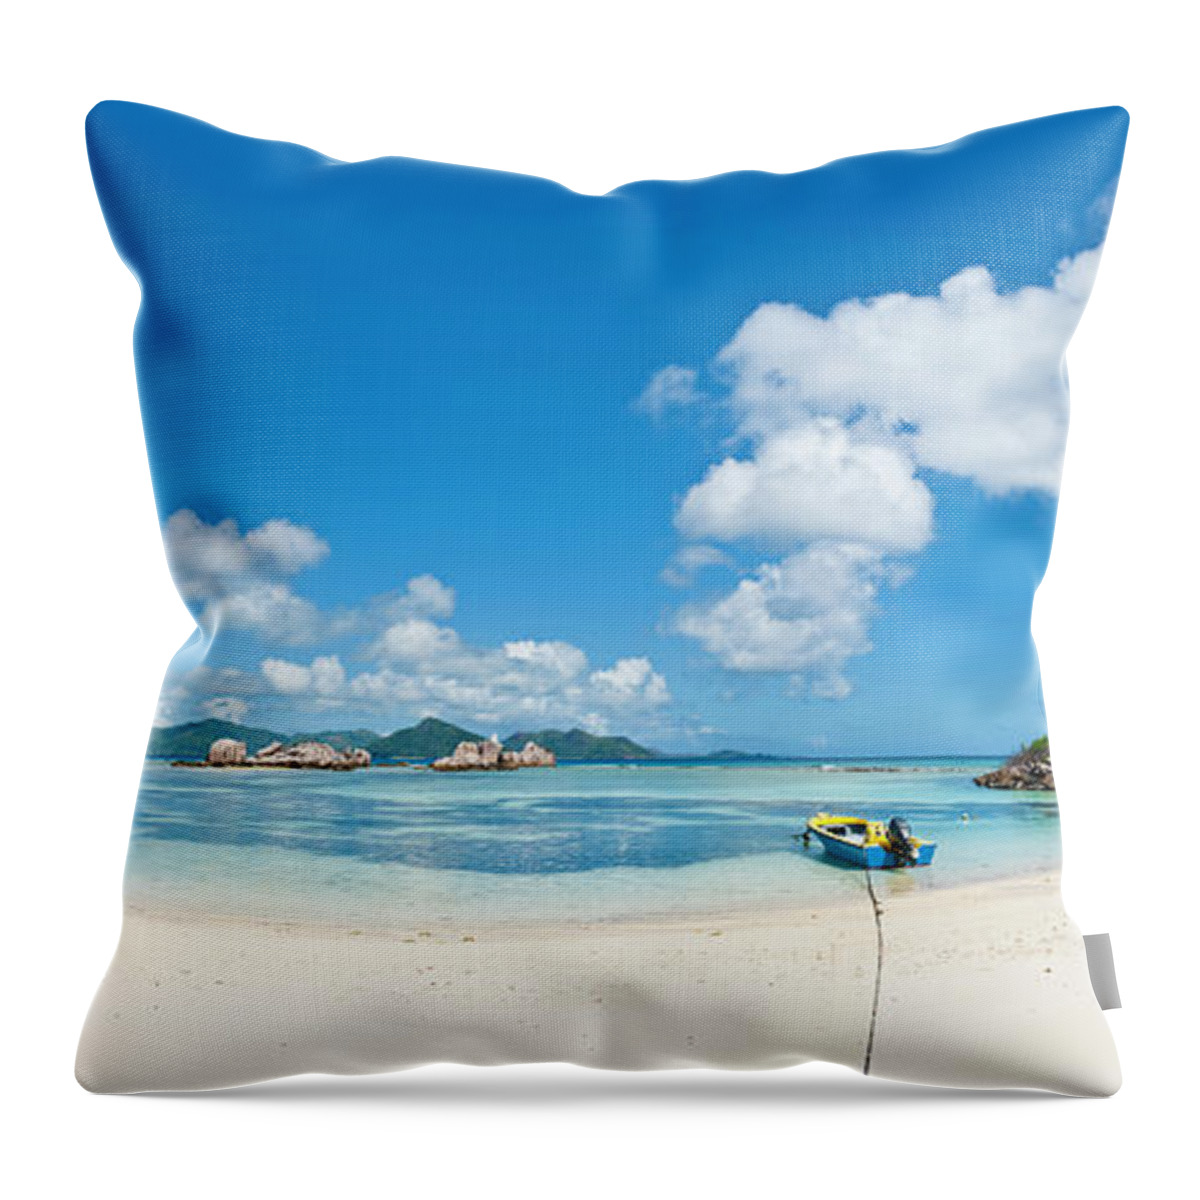 Water's Edge Throw Pillow featuring the photograph Lagoon Beach Harbor Idyllic Tropical by Fotovoyager